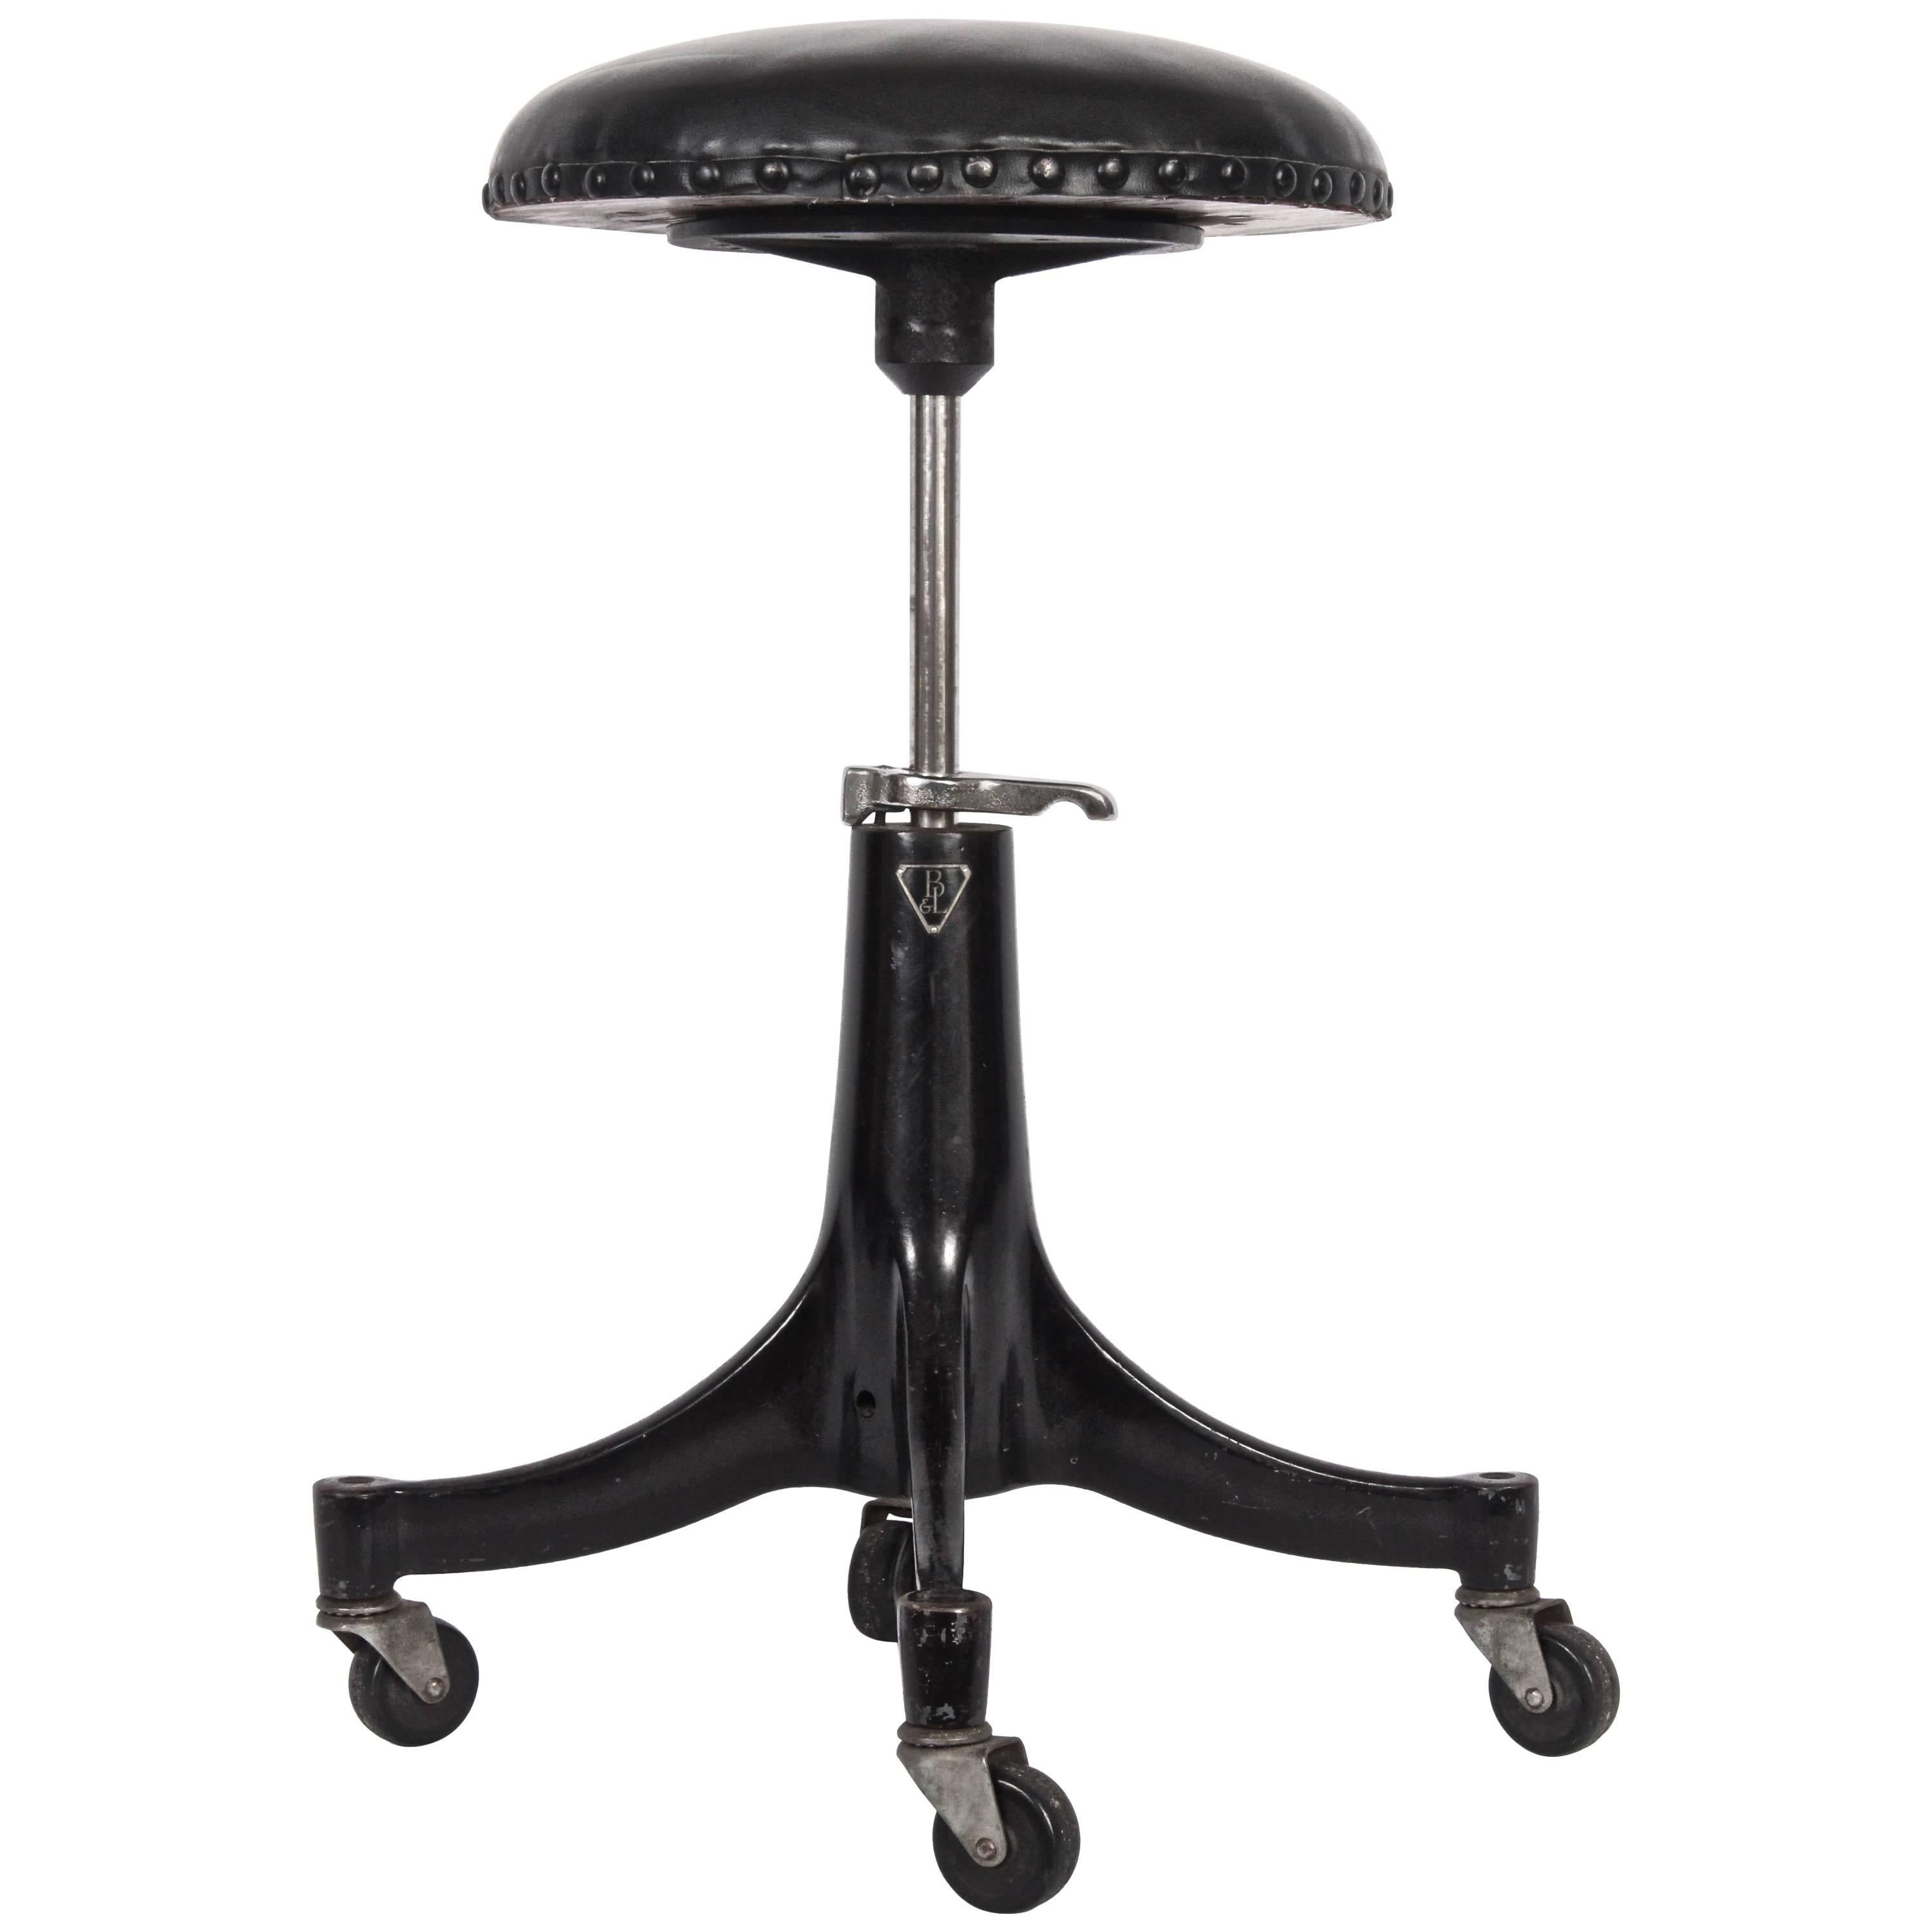 Bausch & Lomb Machine Age Adjusting Cushioned Black Iron Rolling Stool, C. 1930s